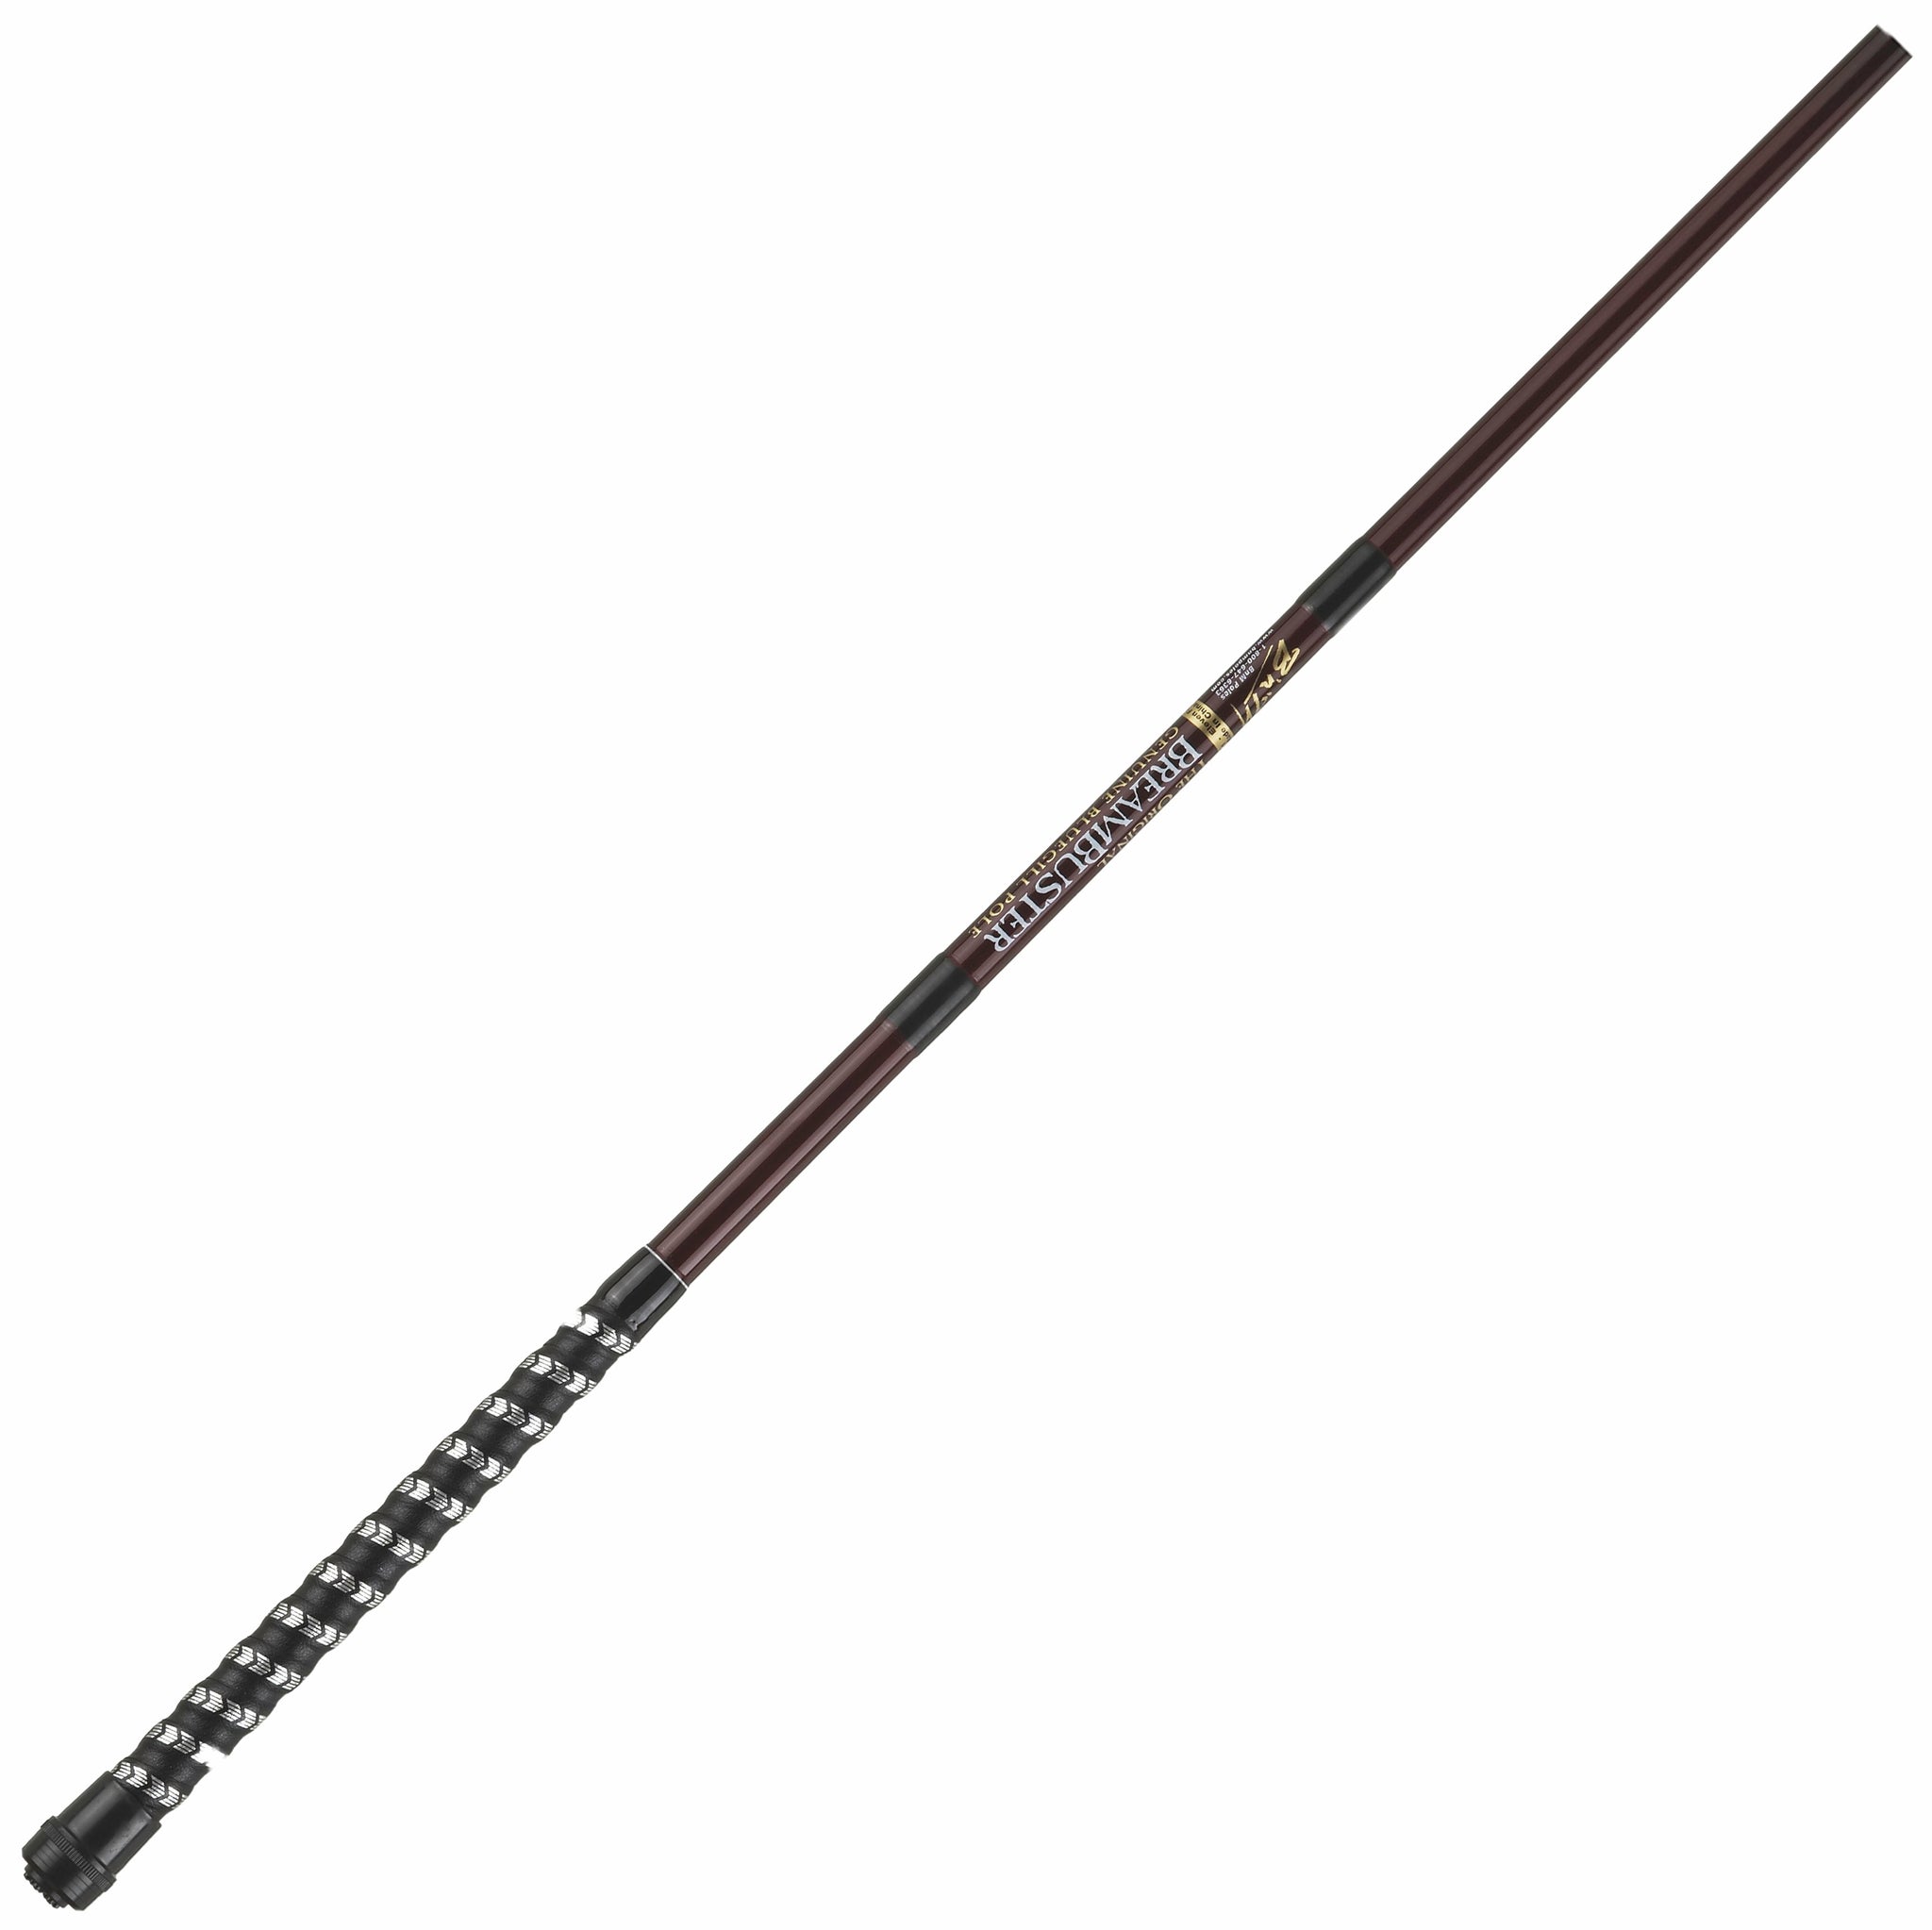 Catfish Telescopic Fishing Rods & Poles for sale